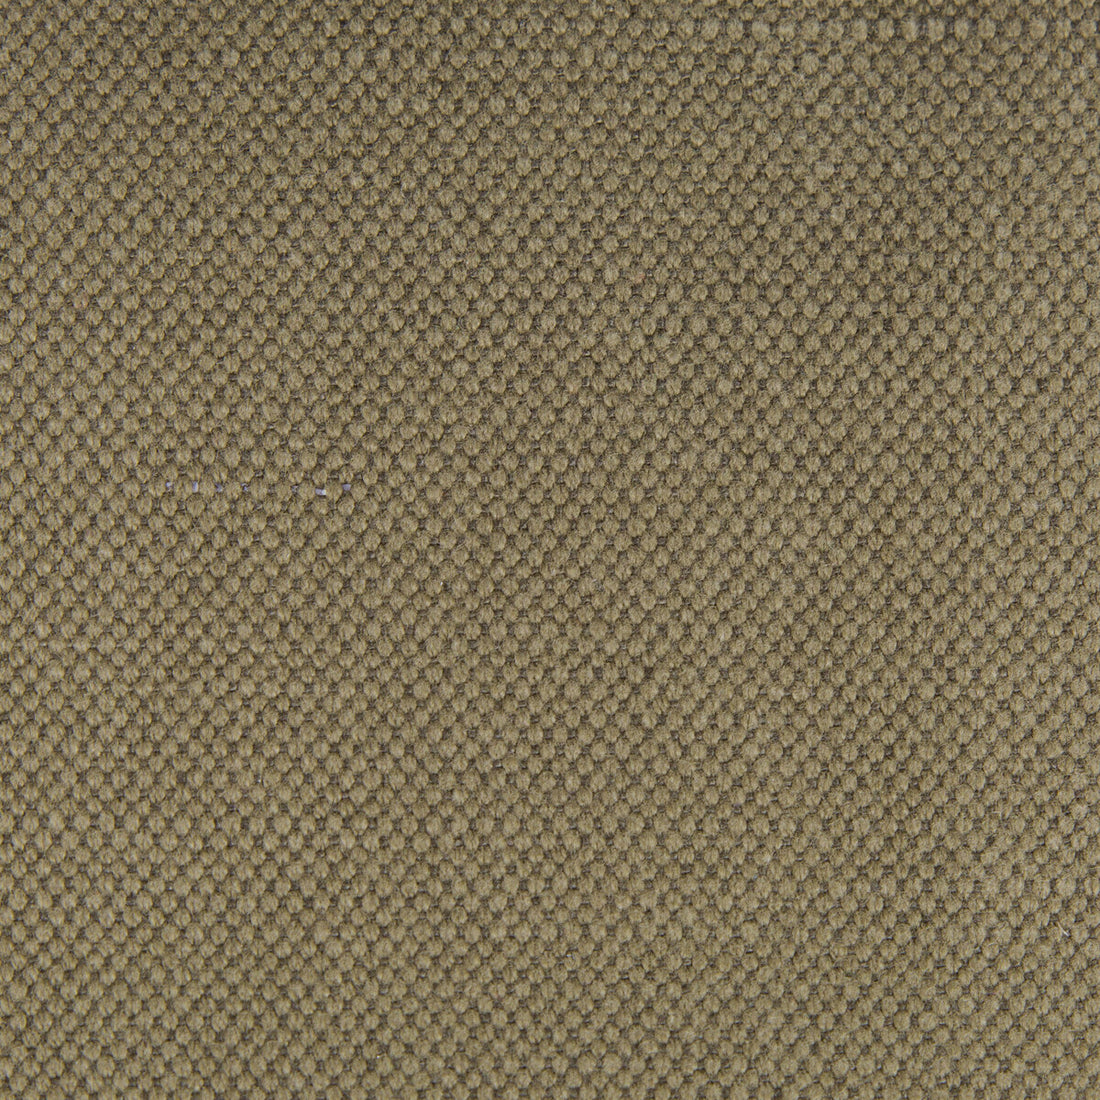 Lima fabric in verde color - pattern GDT5616.036.0 - by Gaston y Daniela in the Gaston Nuevo Mundo collection